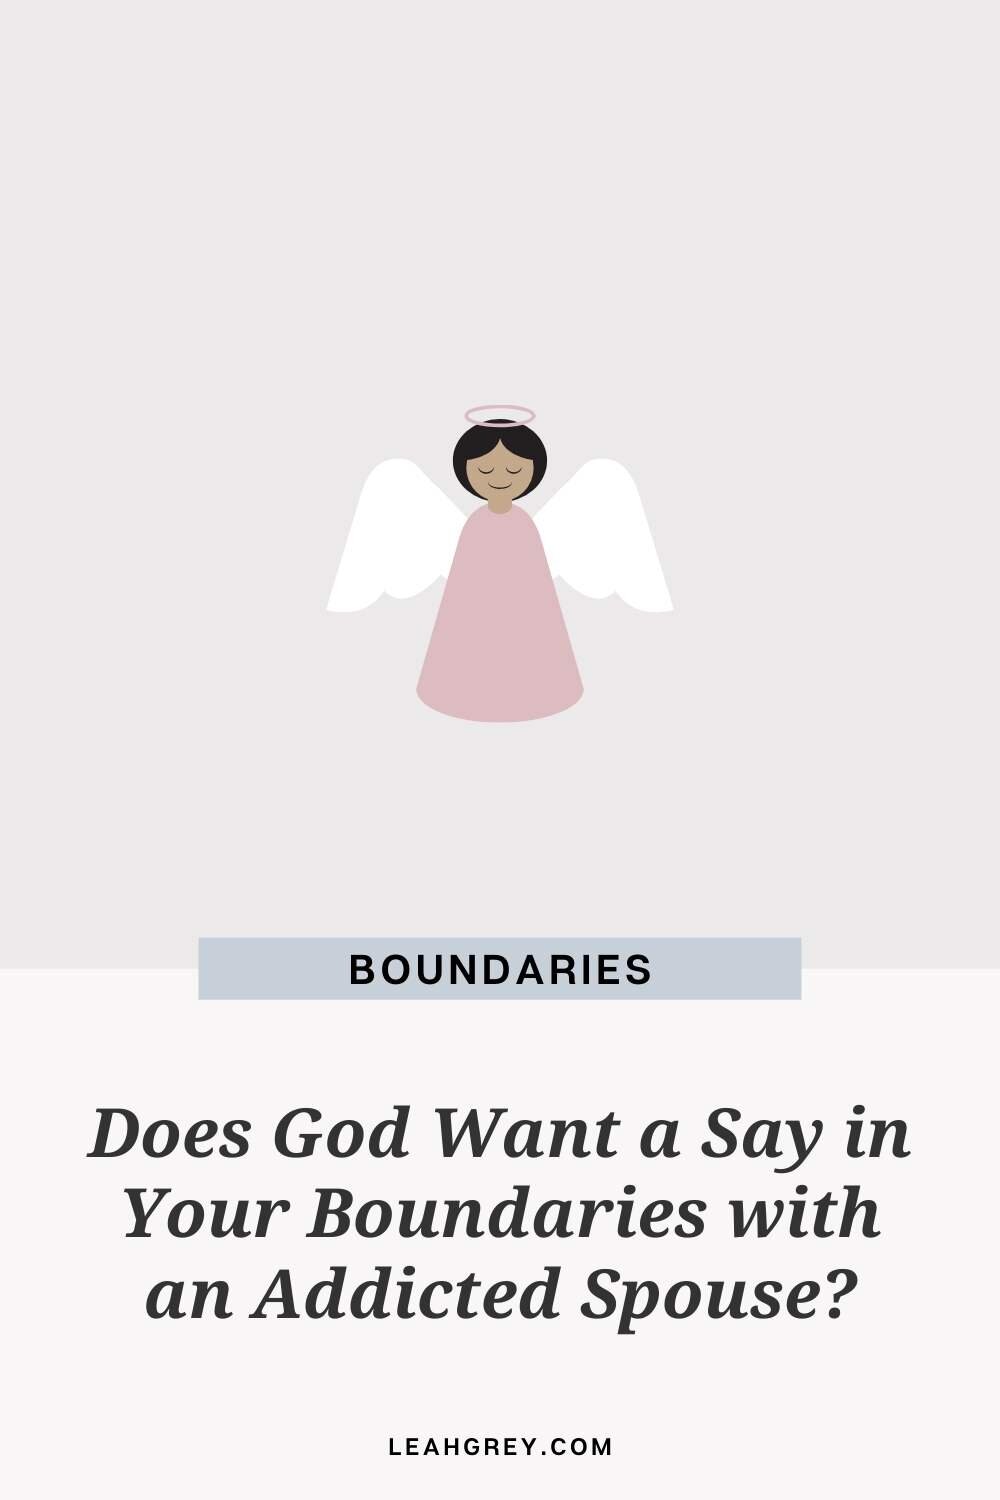 Does Faith Make a Difference in Boundaries with an Addicted Spouse? image